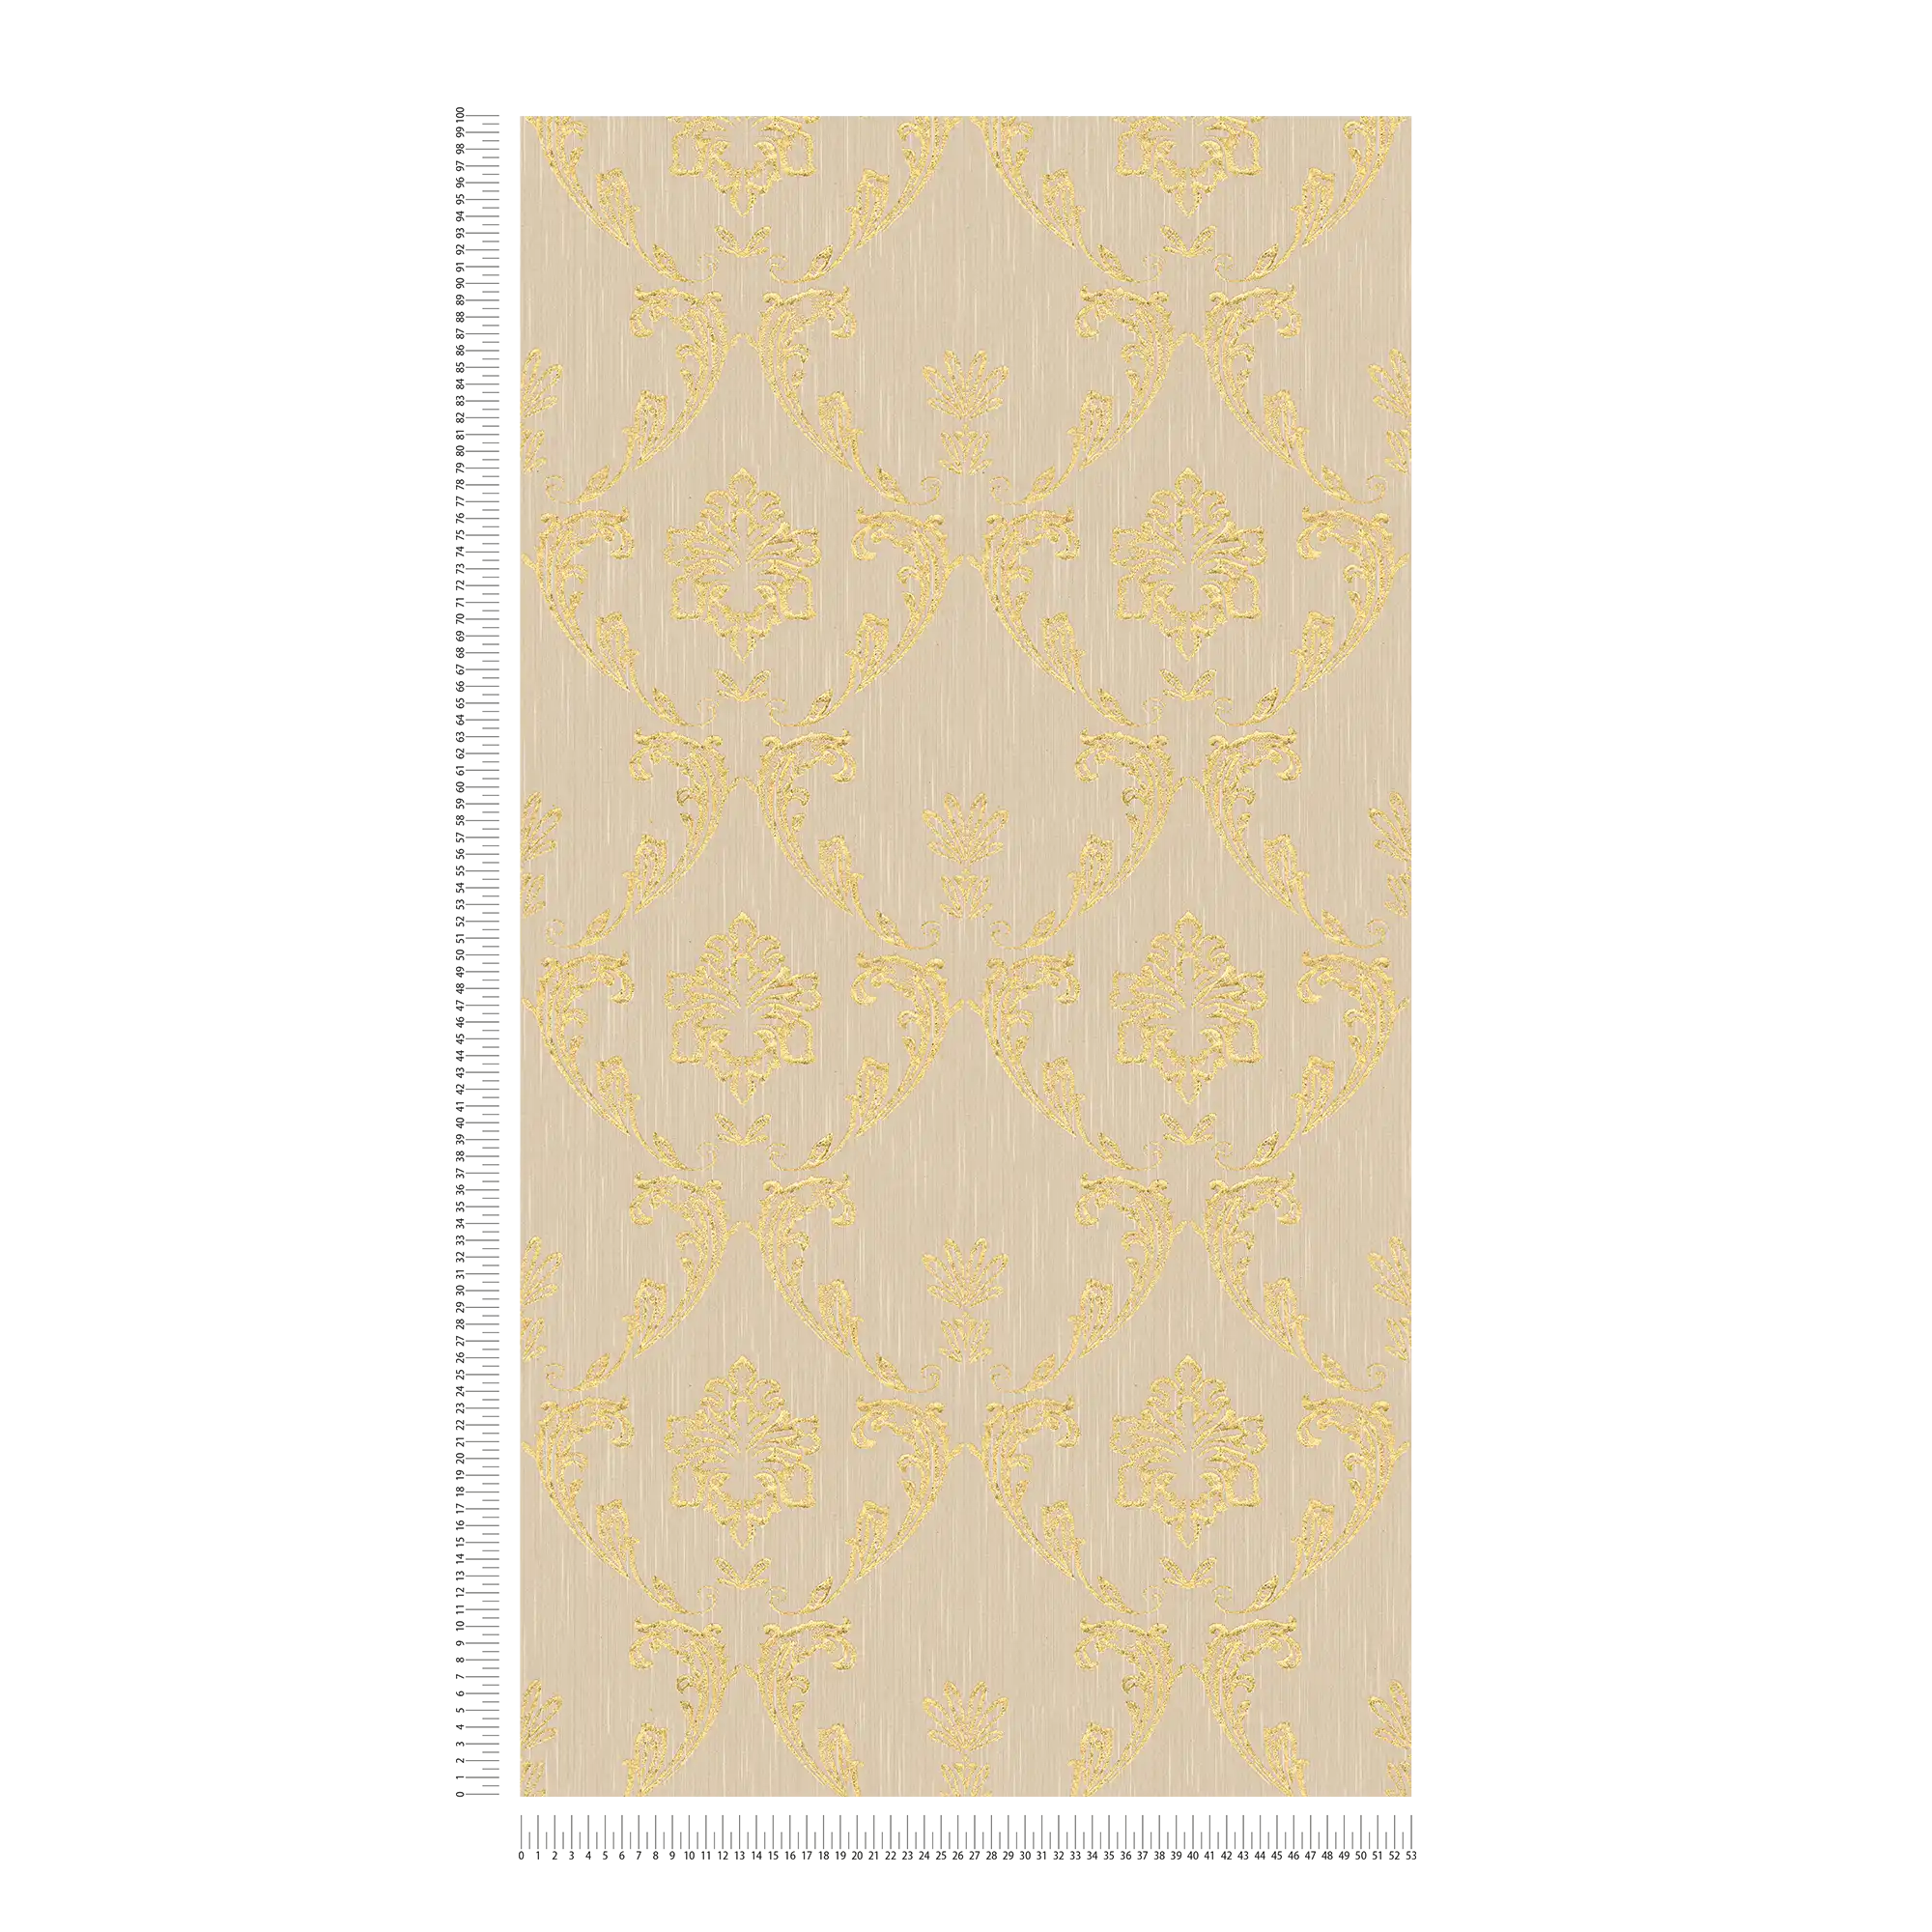             Ornamental wallpaper with floral elements in gold - gold, beige
        